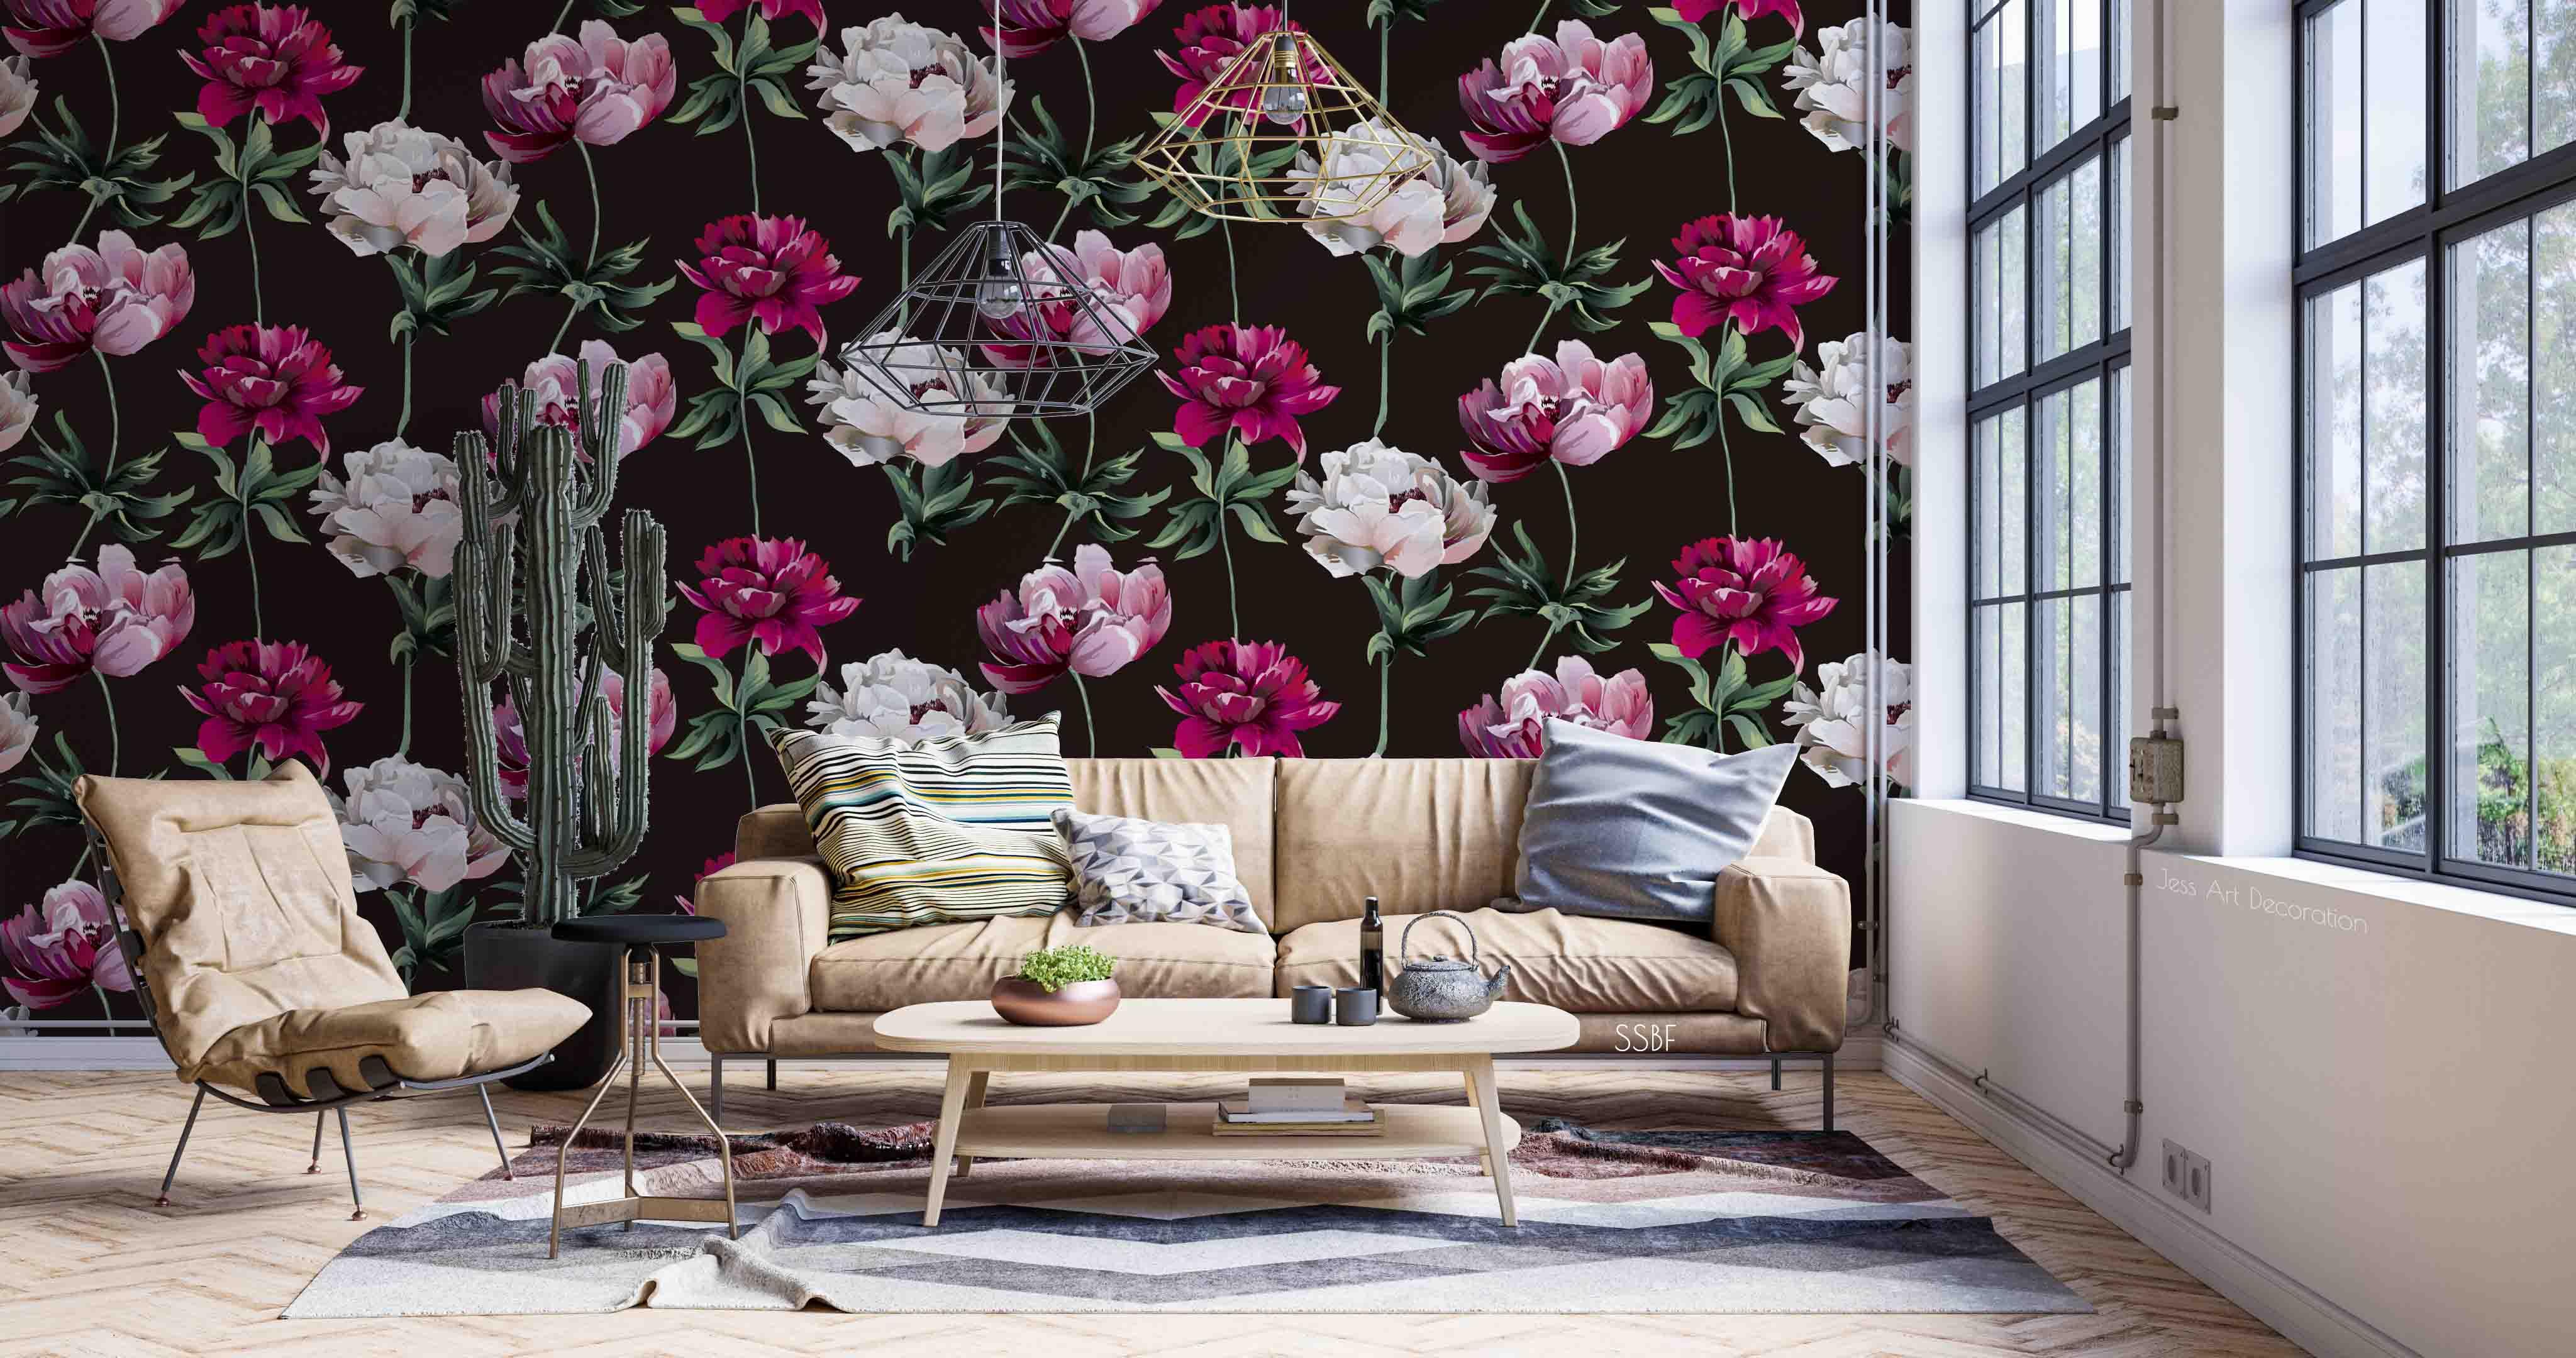 3D Vintage Art Blooming Peony Background Wall Mural Wallpaper GD 3556- Jess Art Decoration